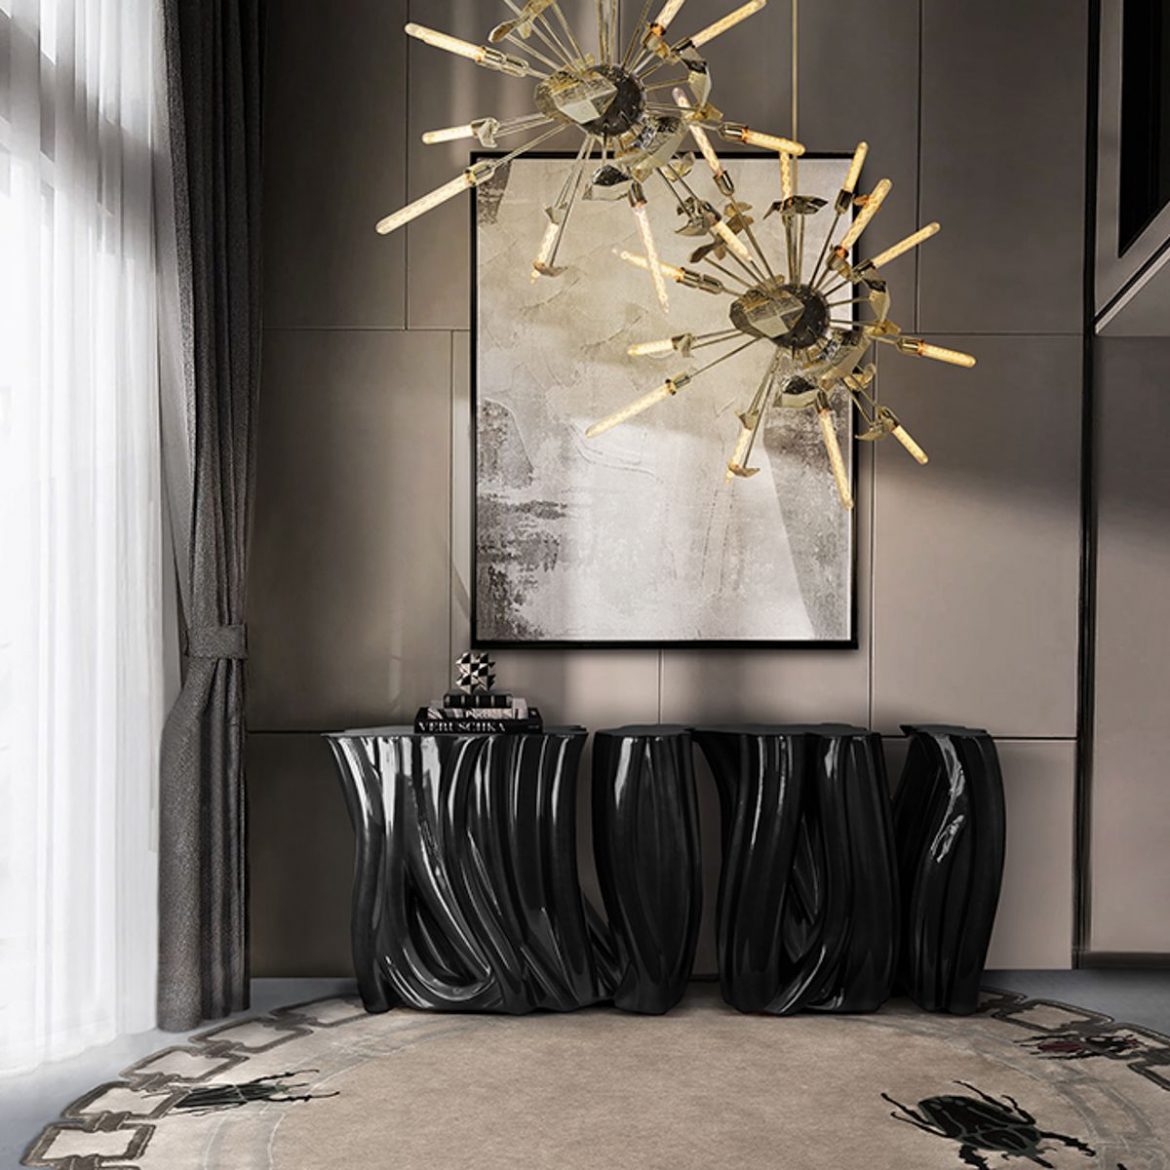 Exclusive and Stunning Suspension Lighting Pieces (Part I)